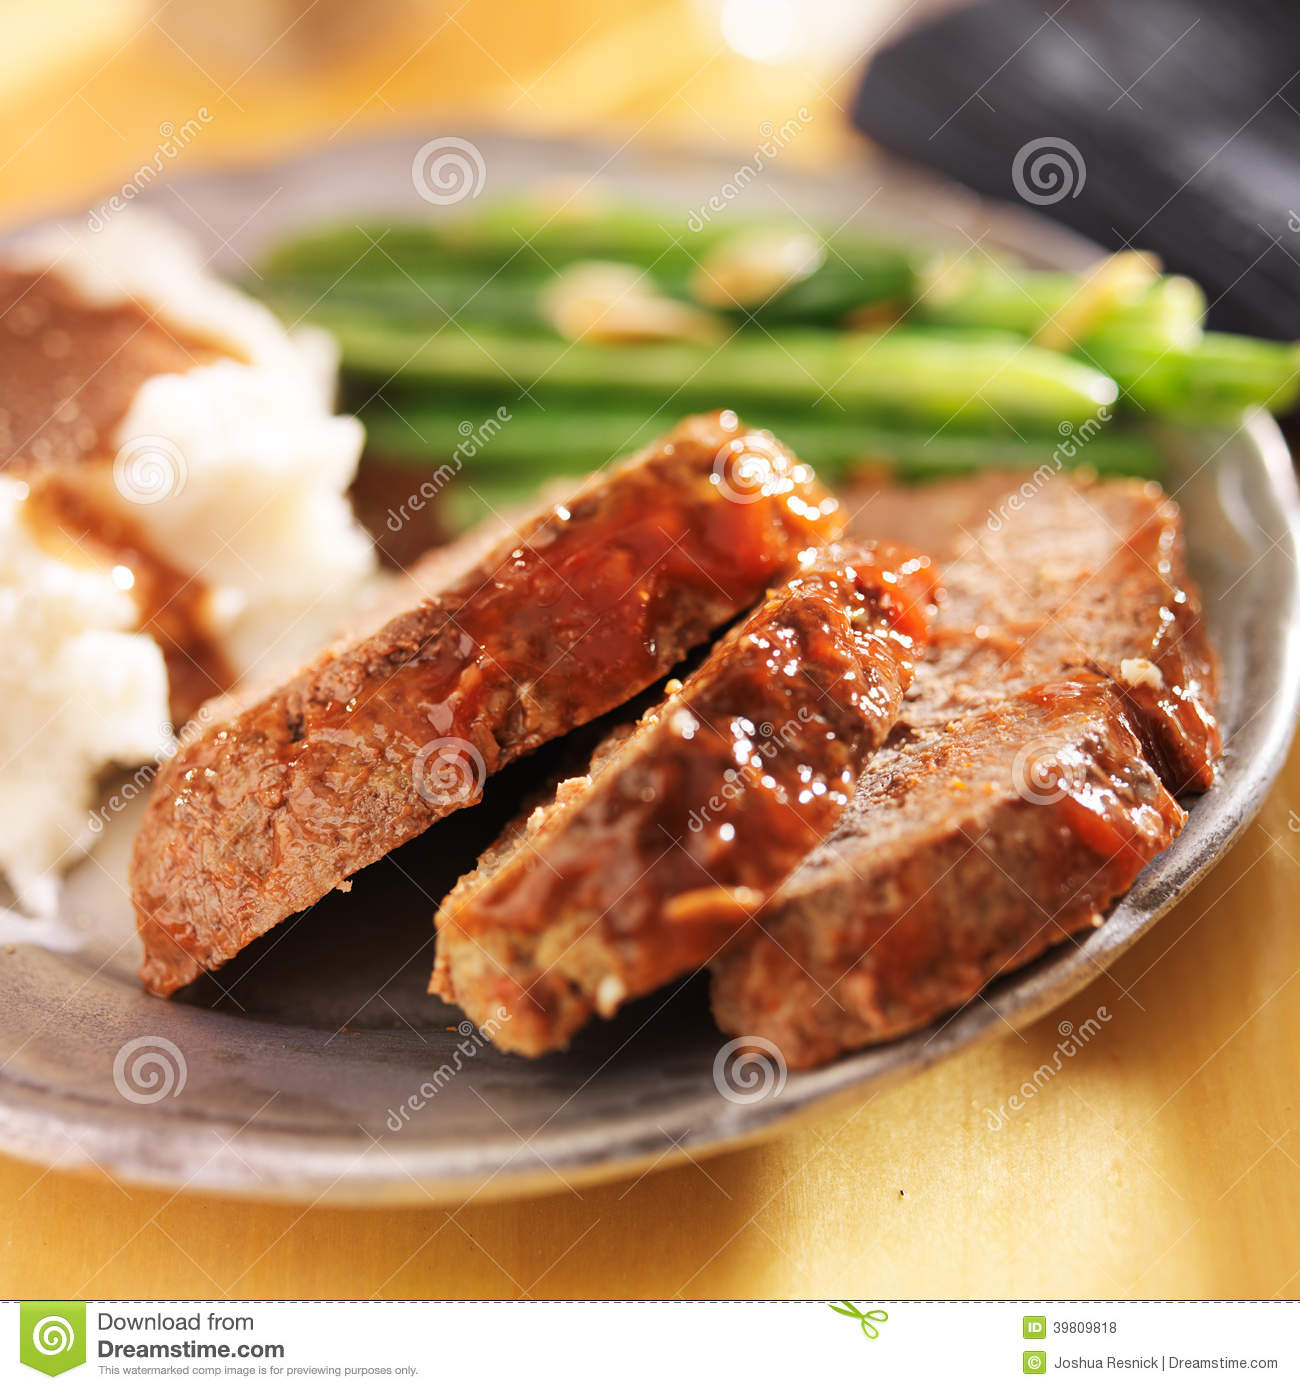 Meatloaf With Greenbeans And Mashed Potatoes Stock Photo   Image